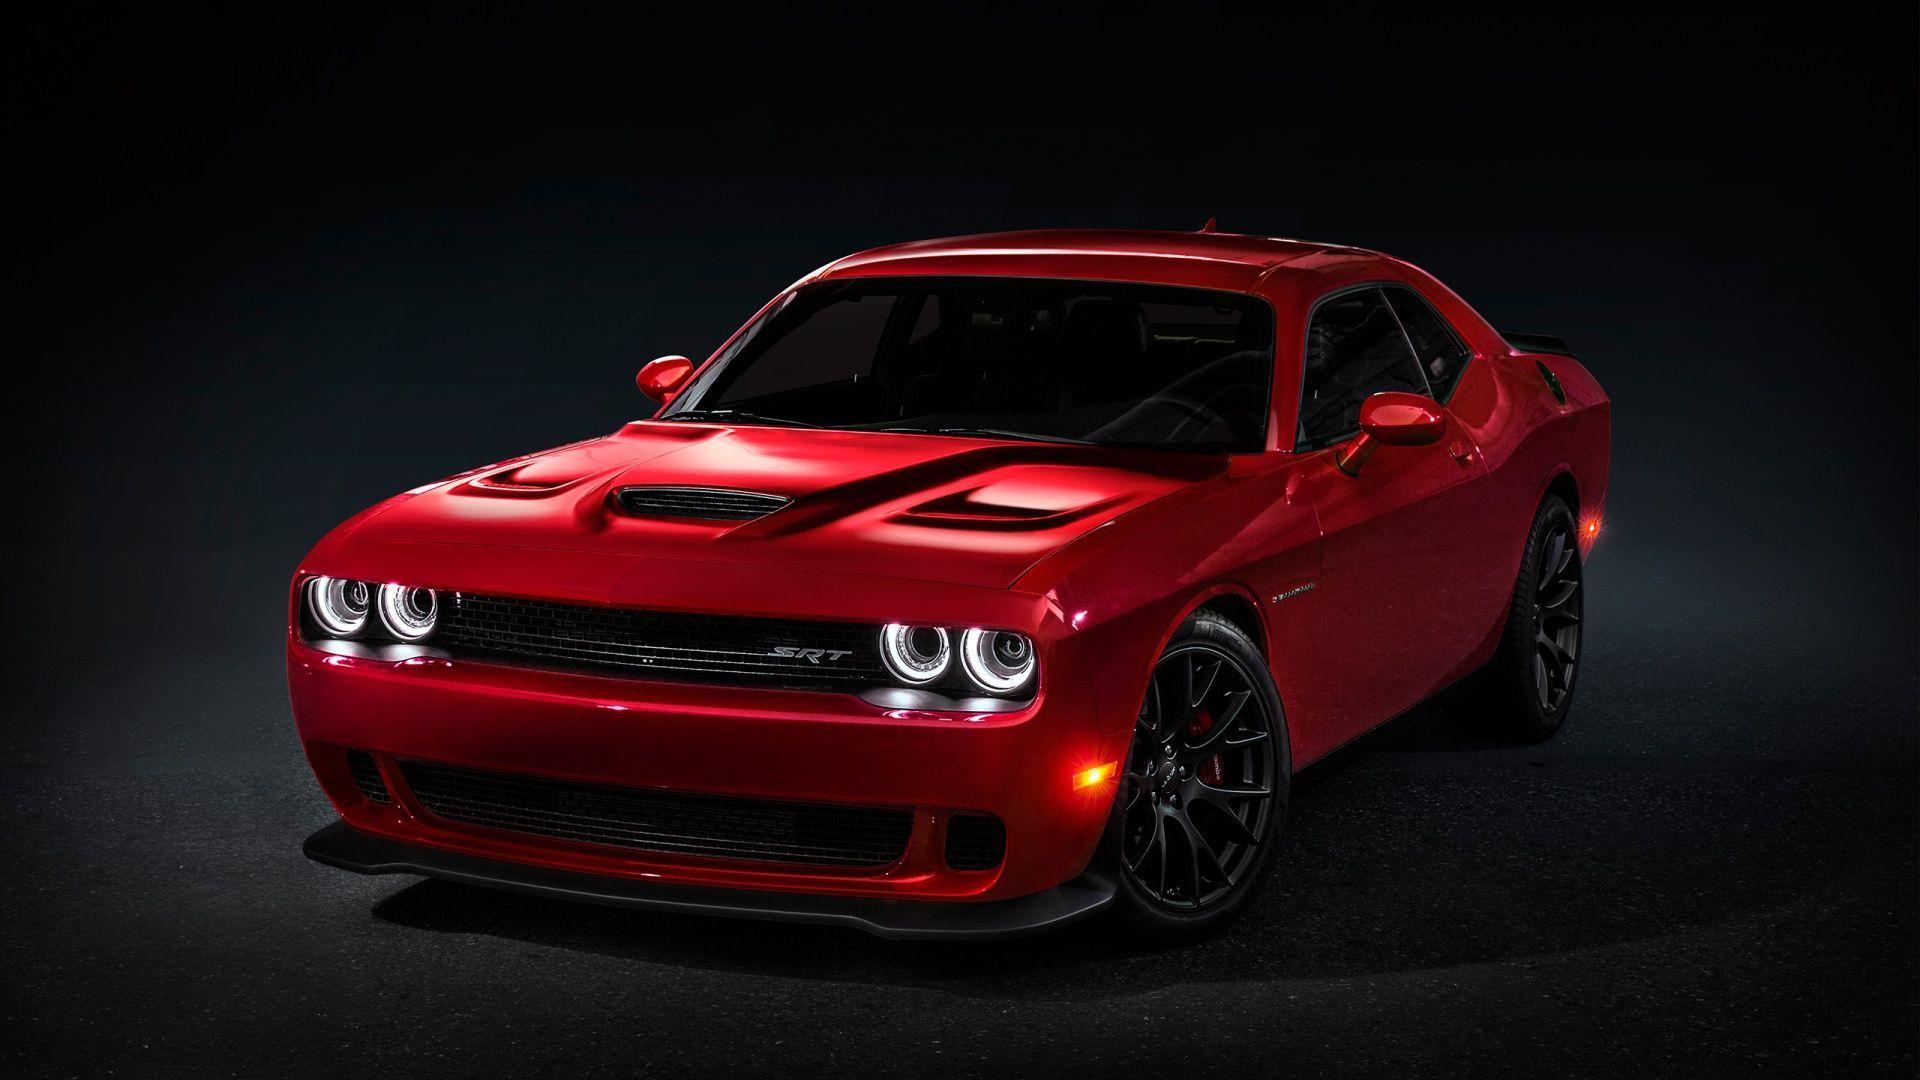 Full HD Wallpaper dodge challenger red front view muscle car